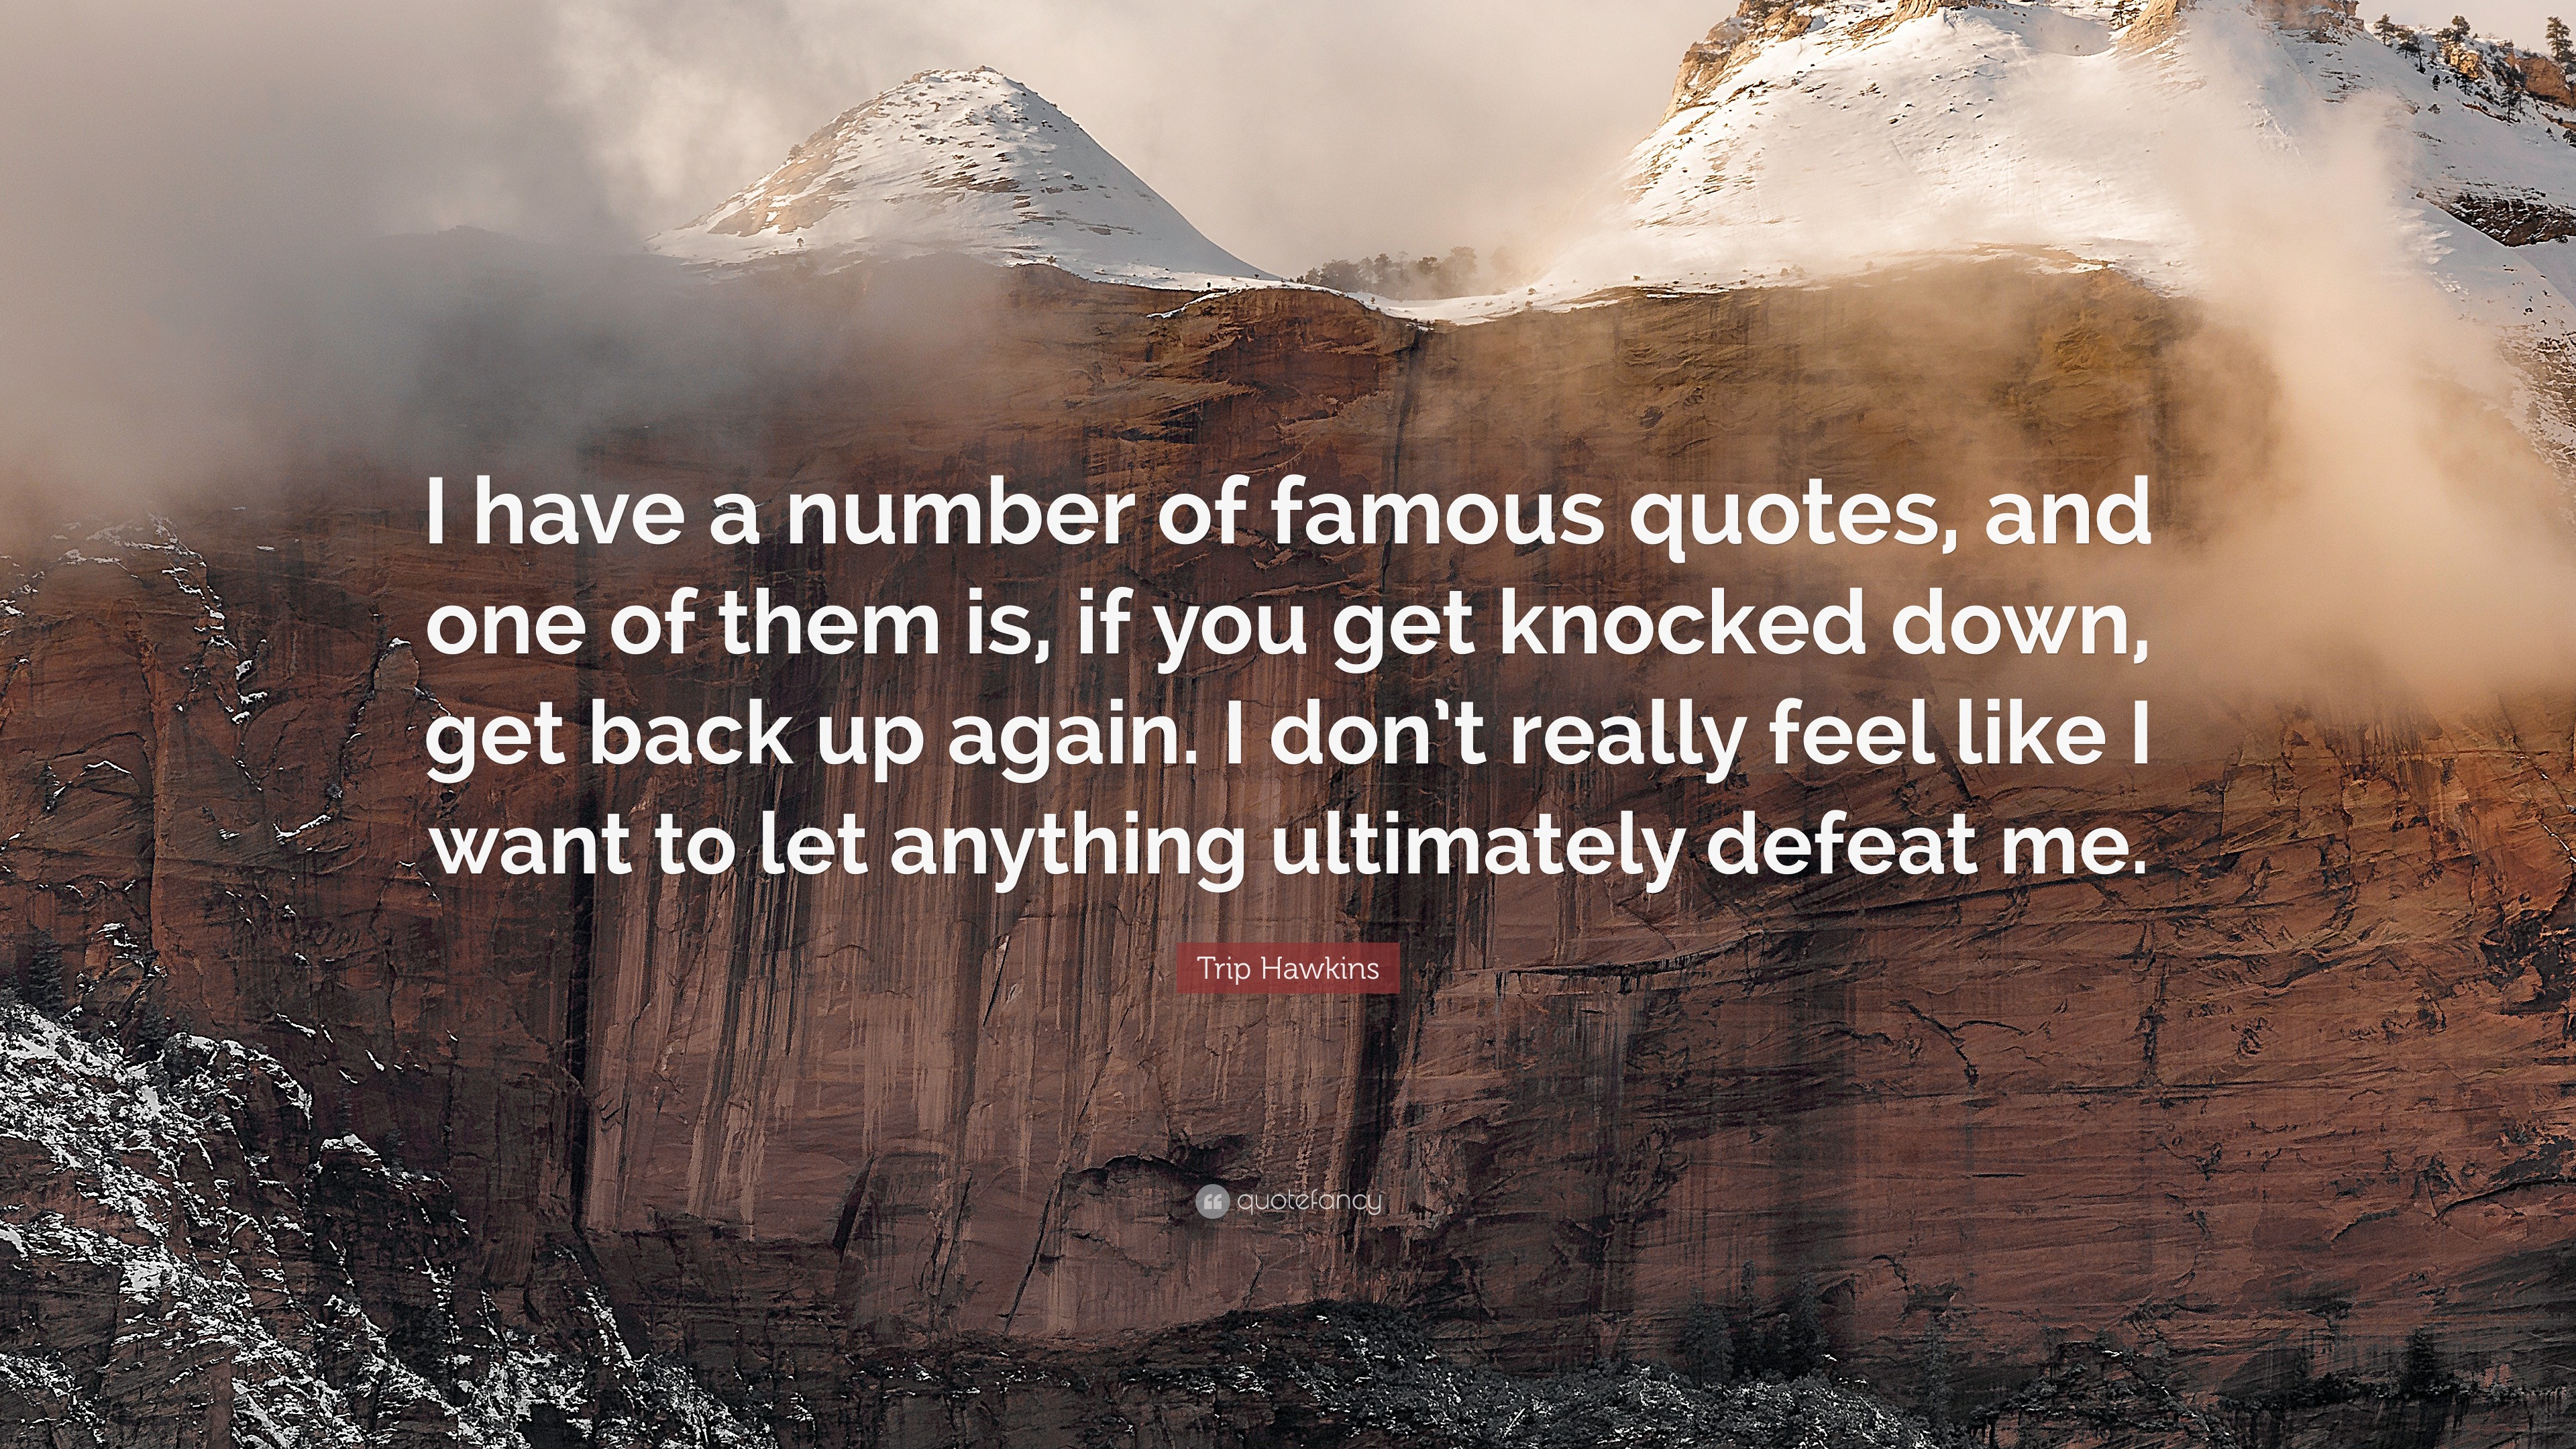 Trip Hawkins Quote I Have A Number Of Famous Quotes And One Of Them Is If You Get Knocked Down Get Back Up Again I Don T Really Feel Li 7 Wallpapers